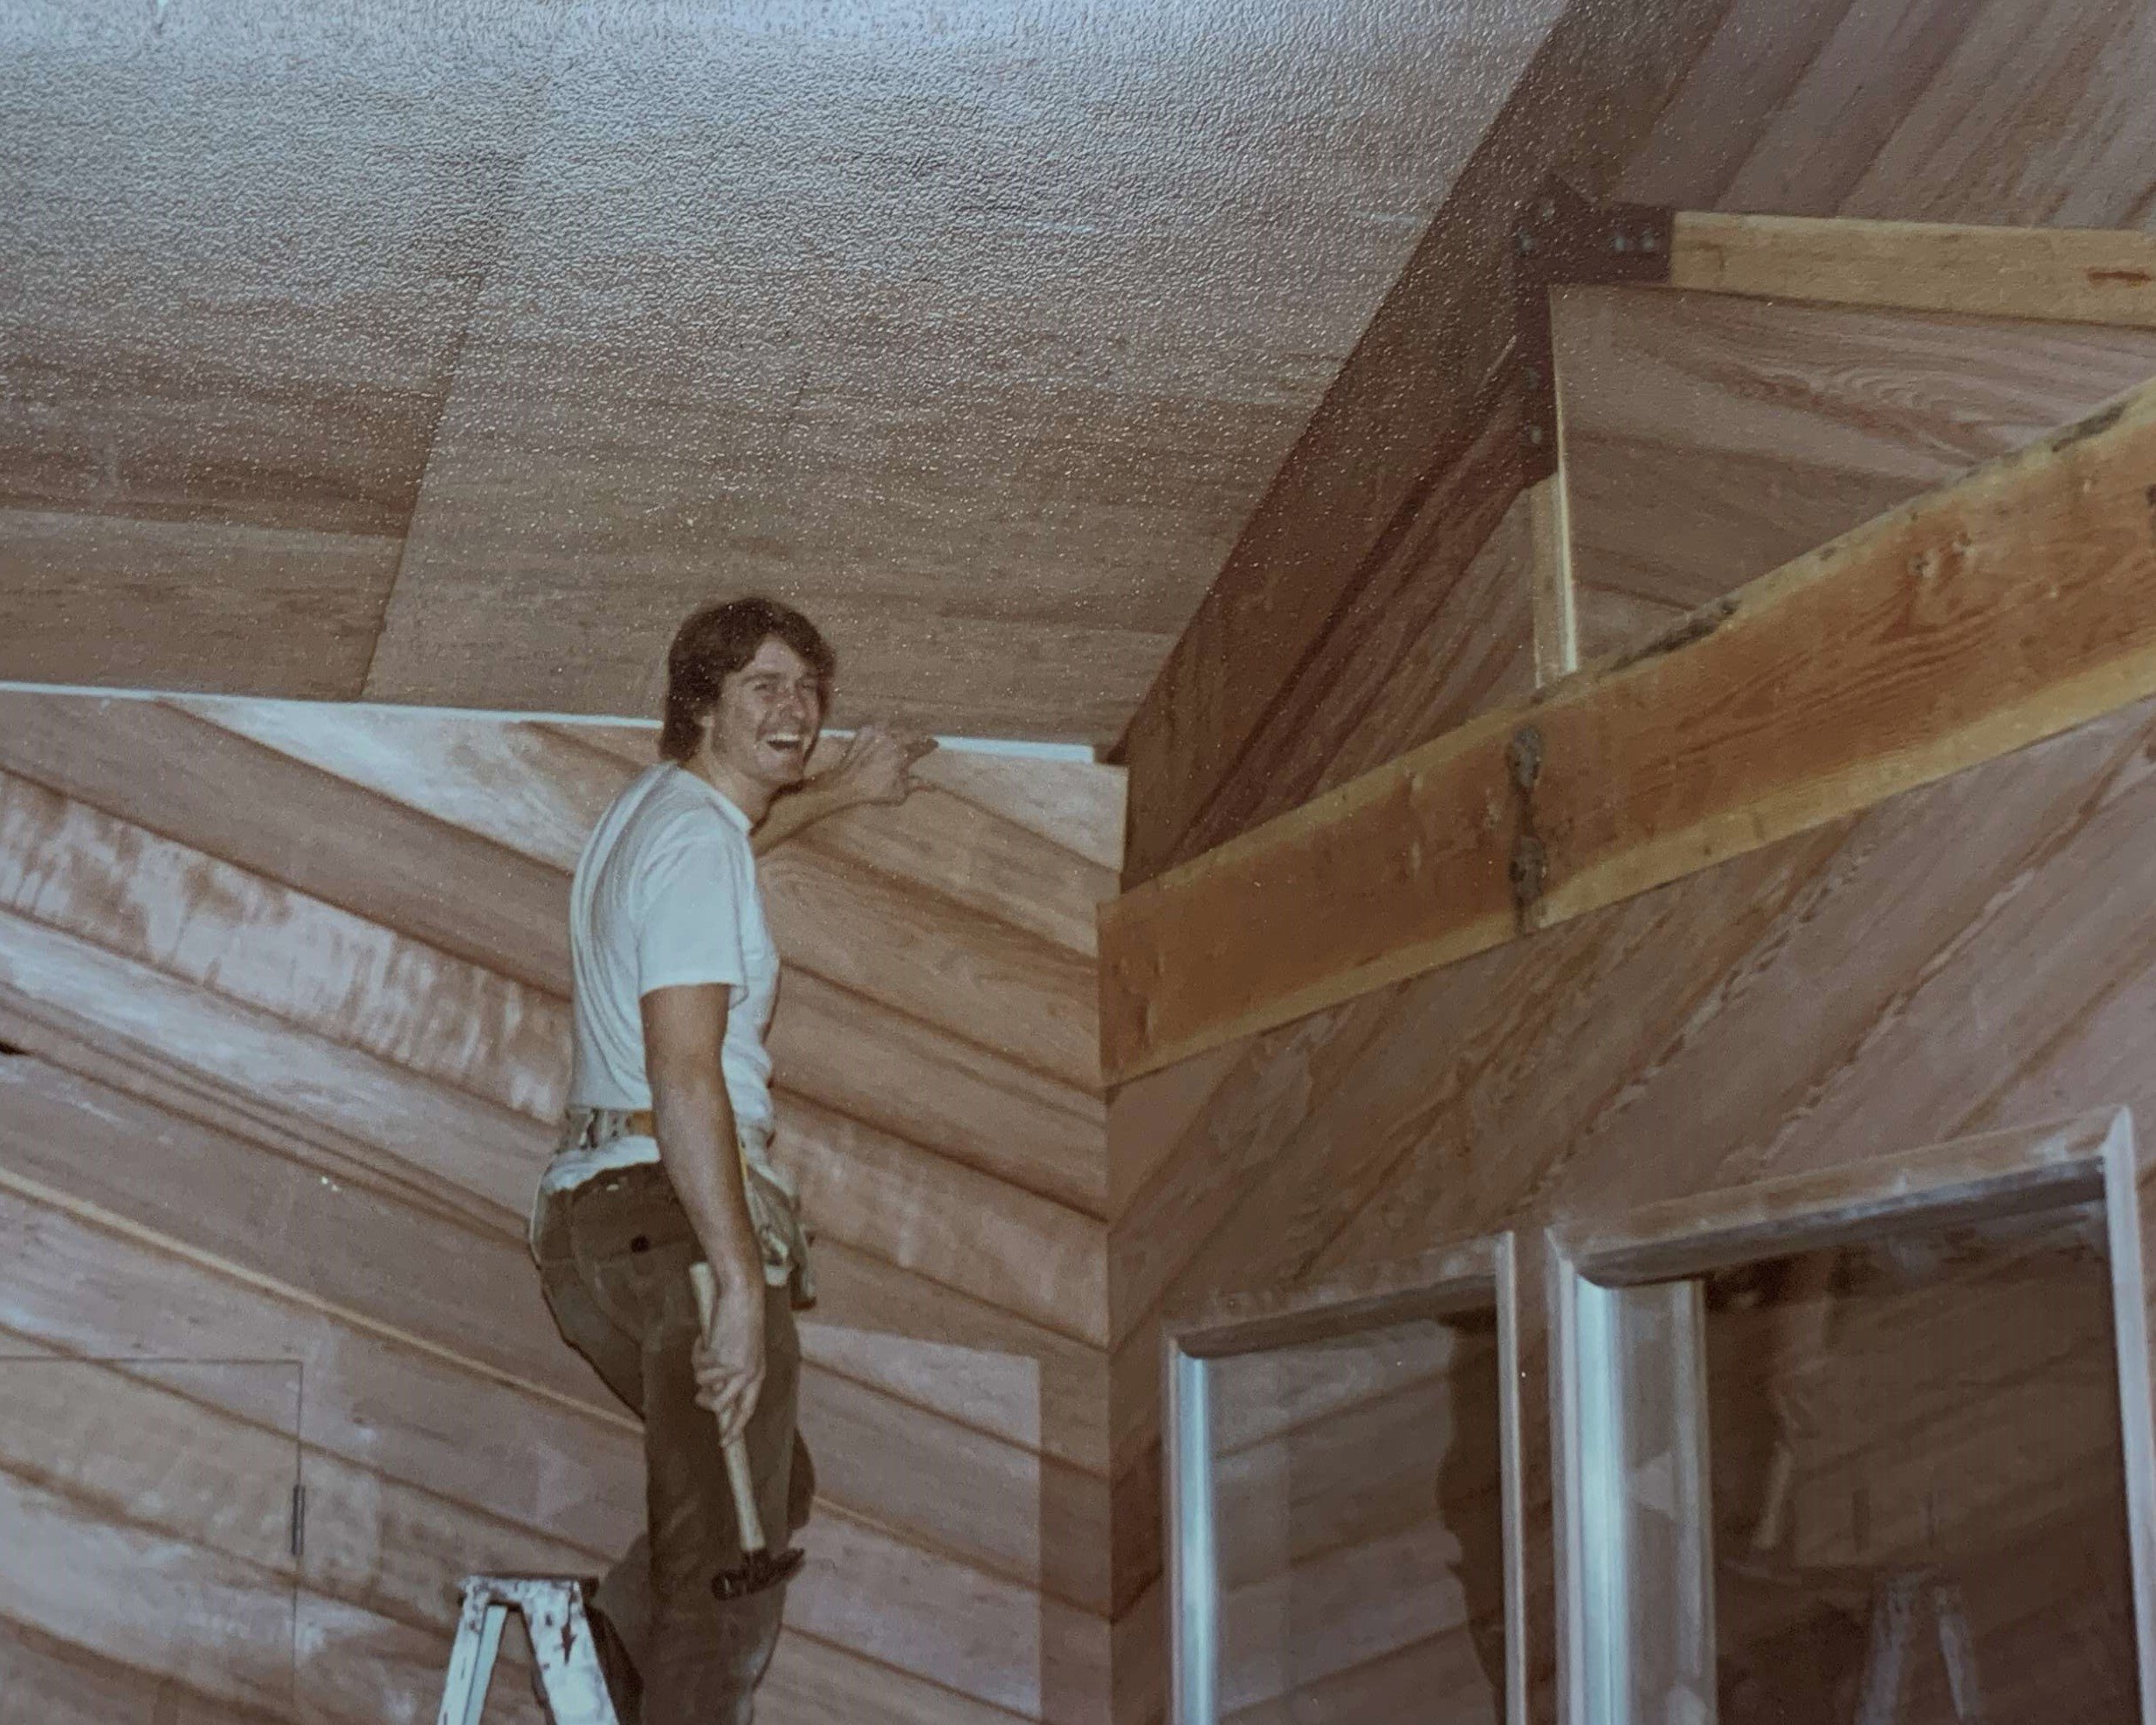 The Homestead during construction in 1977